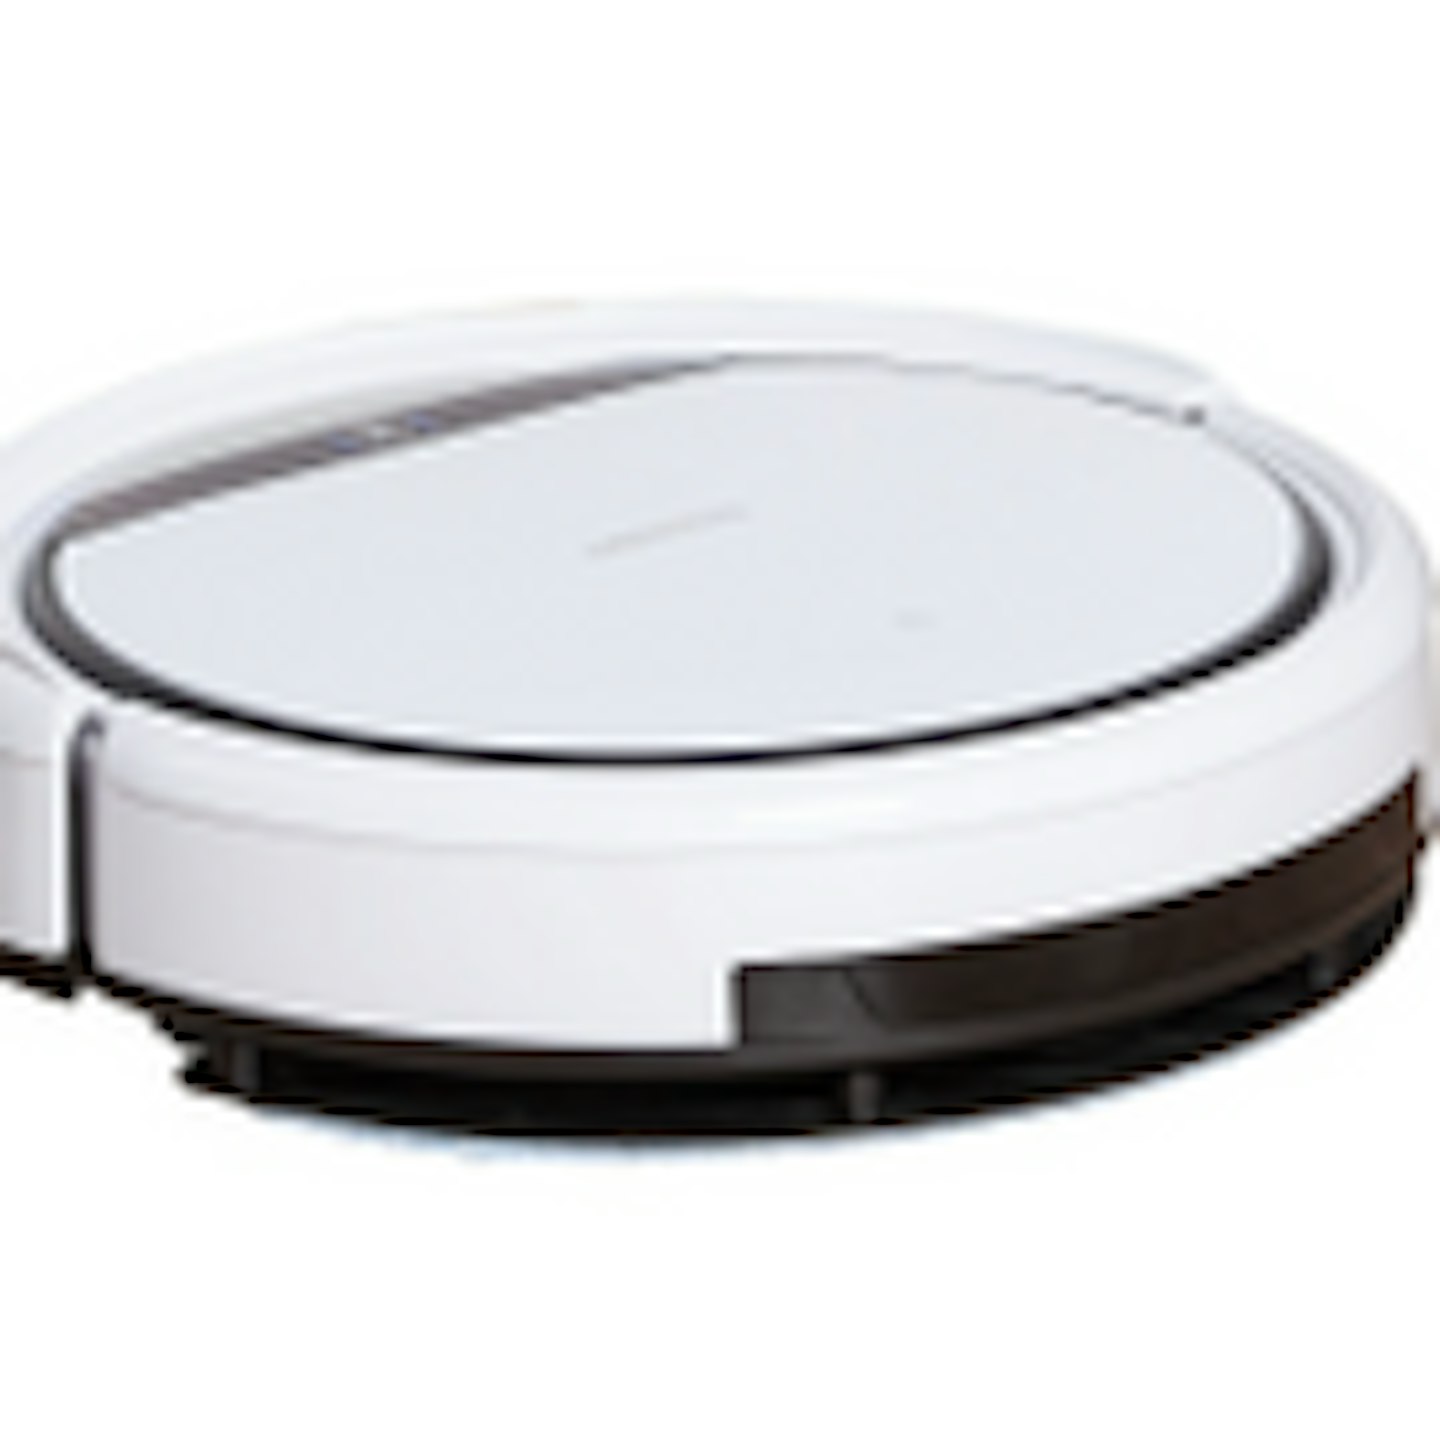 Medion MD 19510 Robotic Vacuum Cleaner with Wet Mop Function